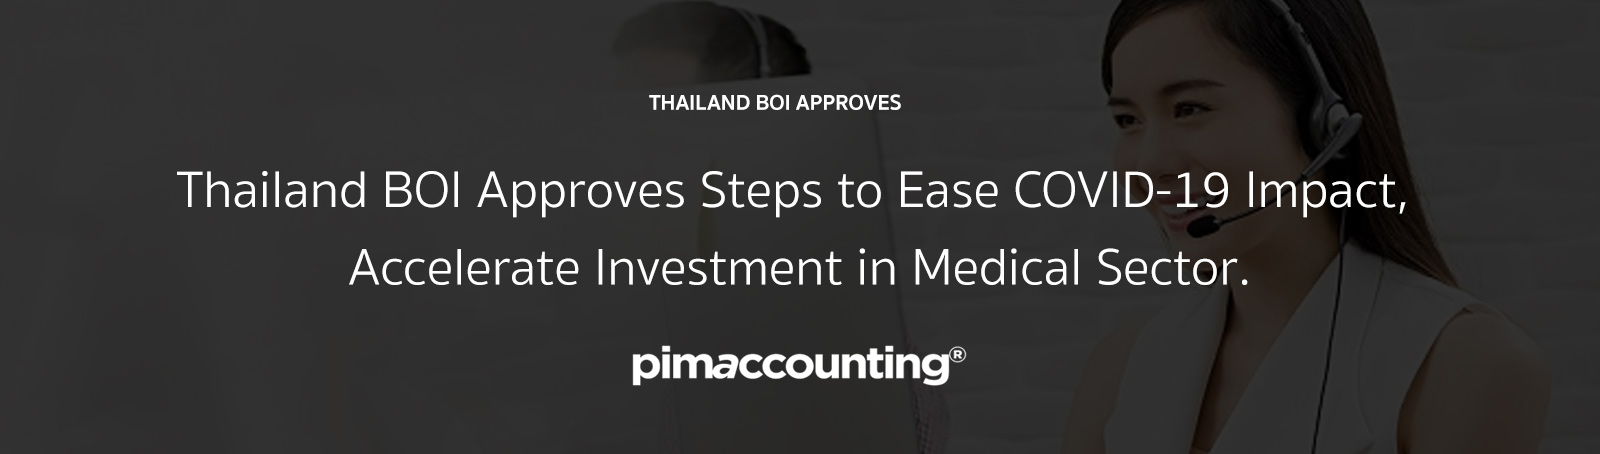 Thailand BOI Approves Steps to Ease COVID-19 Impact, Accelerate Investment in Medical Sector.